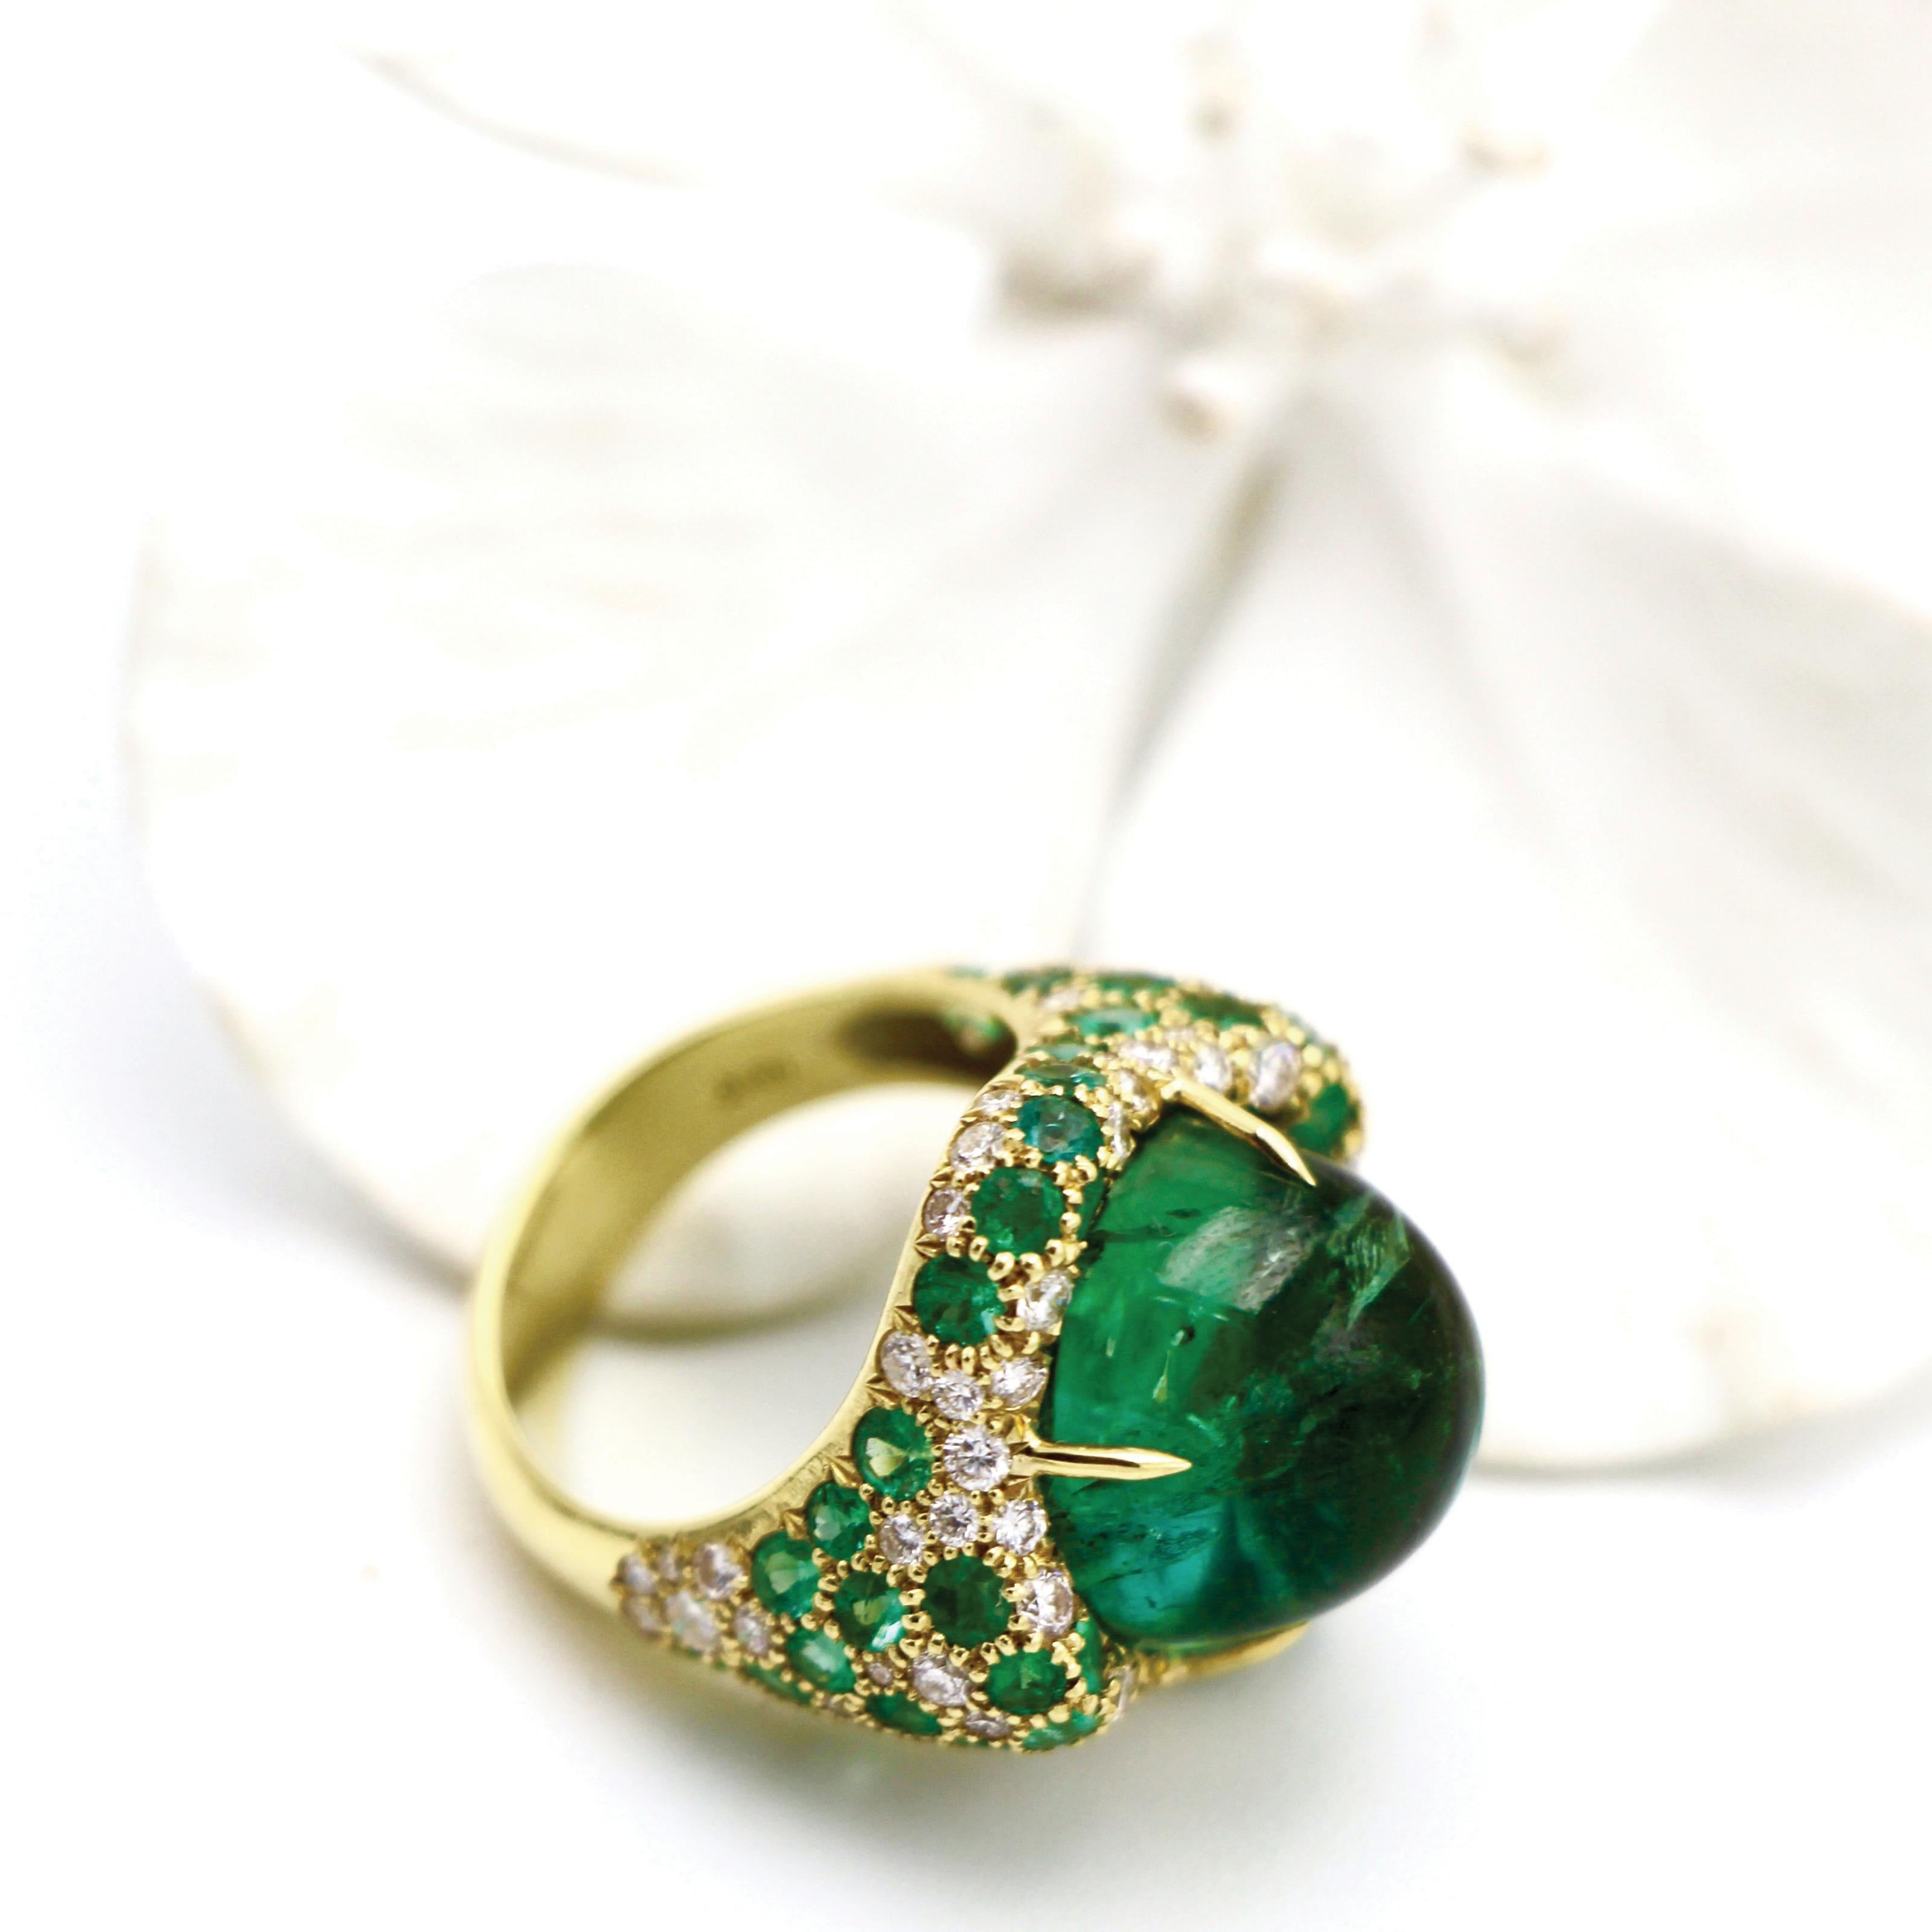 The stunning Green Tourmaline (17.75ct) set off by Diamonds (1.33ct) and Emeralds (2.59ct) in an 18kt Gold band will turn any heads at the next Met Gala. 

Dimensions of Green Tourmaline: 14.43mm
Dimensions of Face of Ring: 23.02mm x 22.65mm